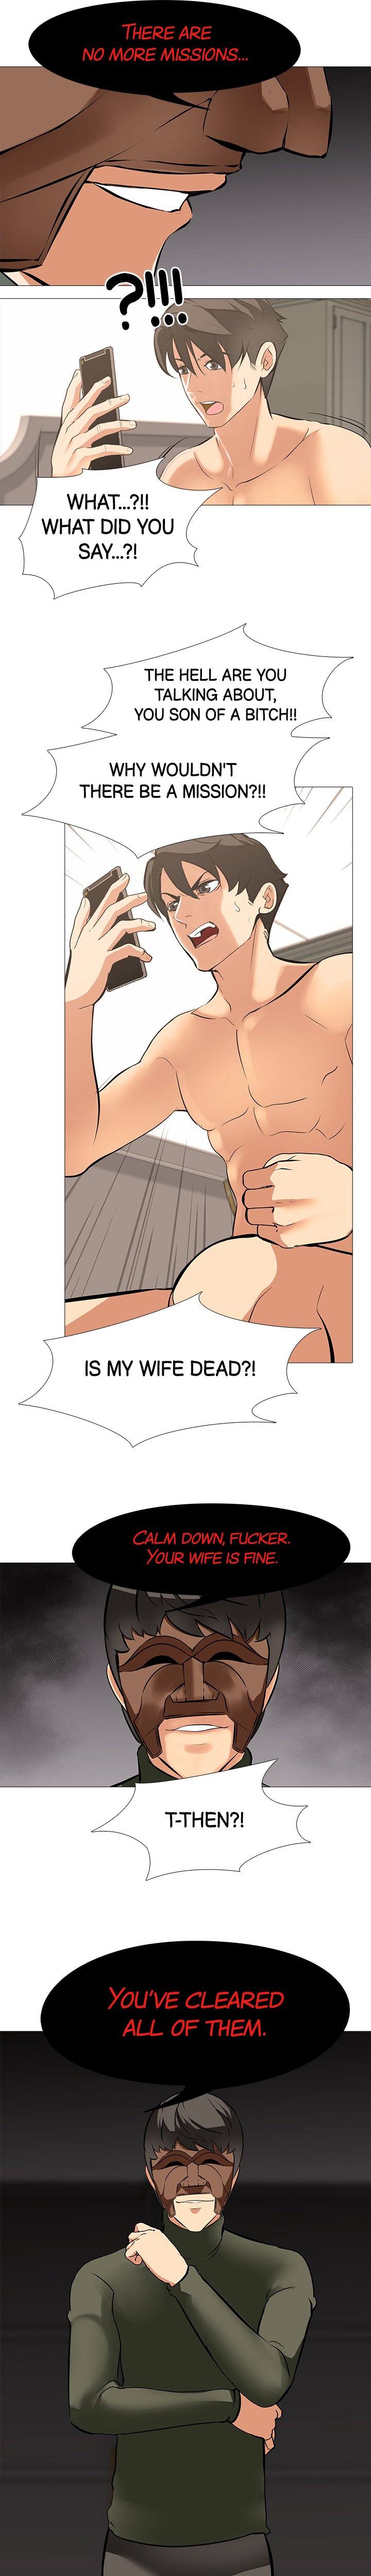 WIFE GAME image